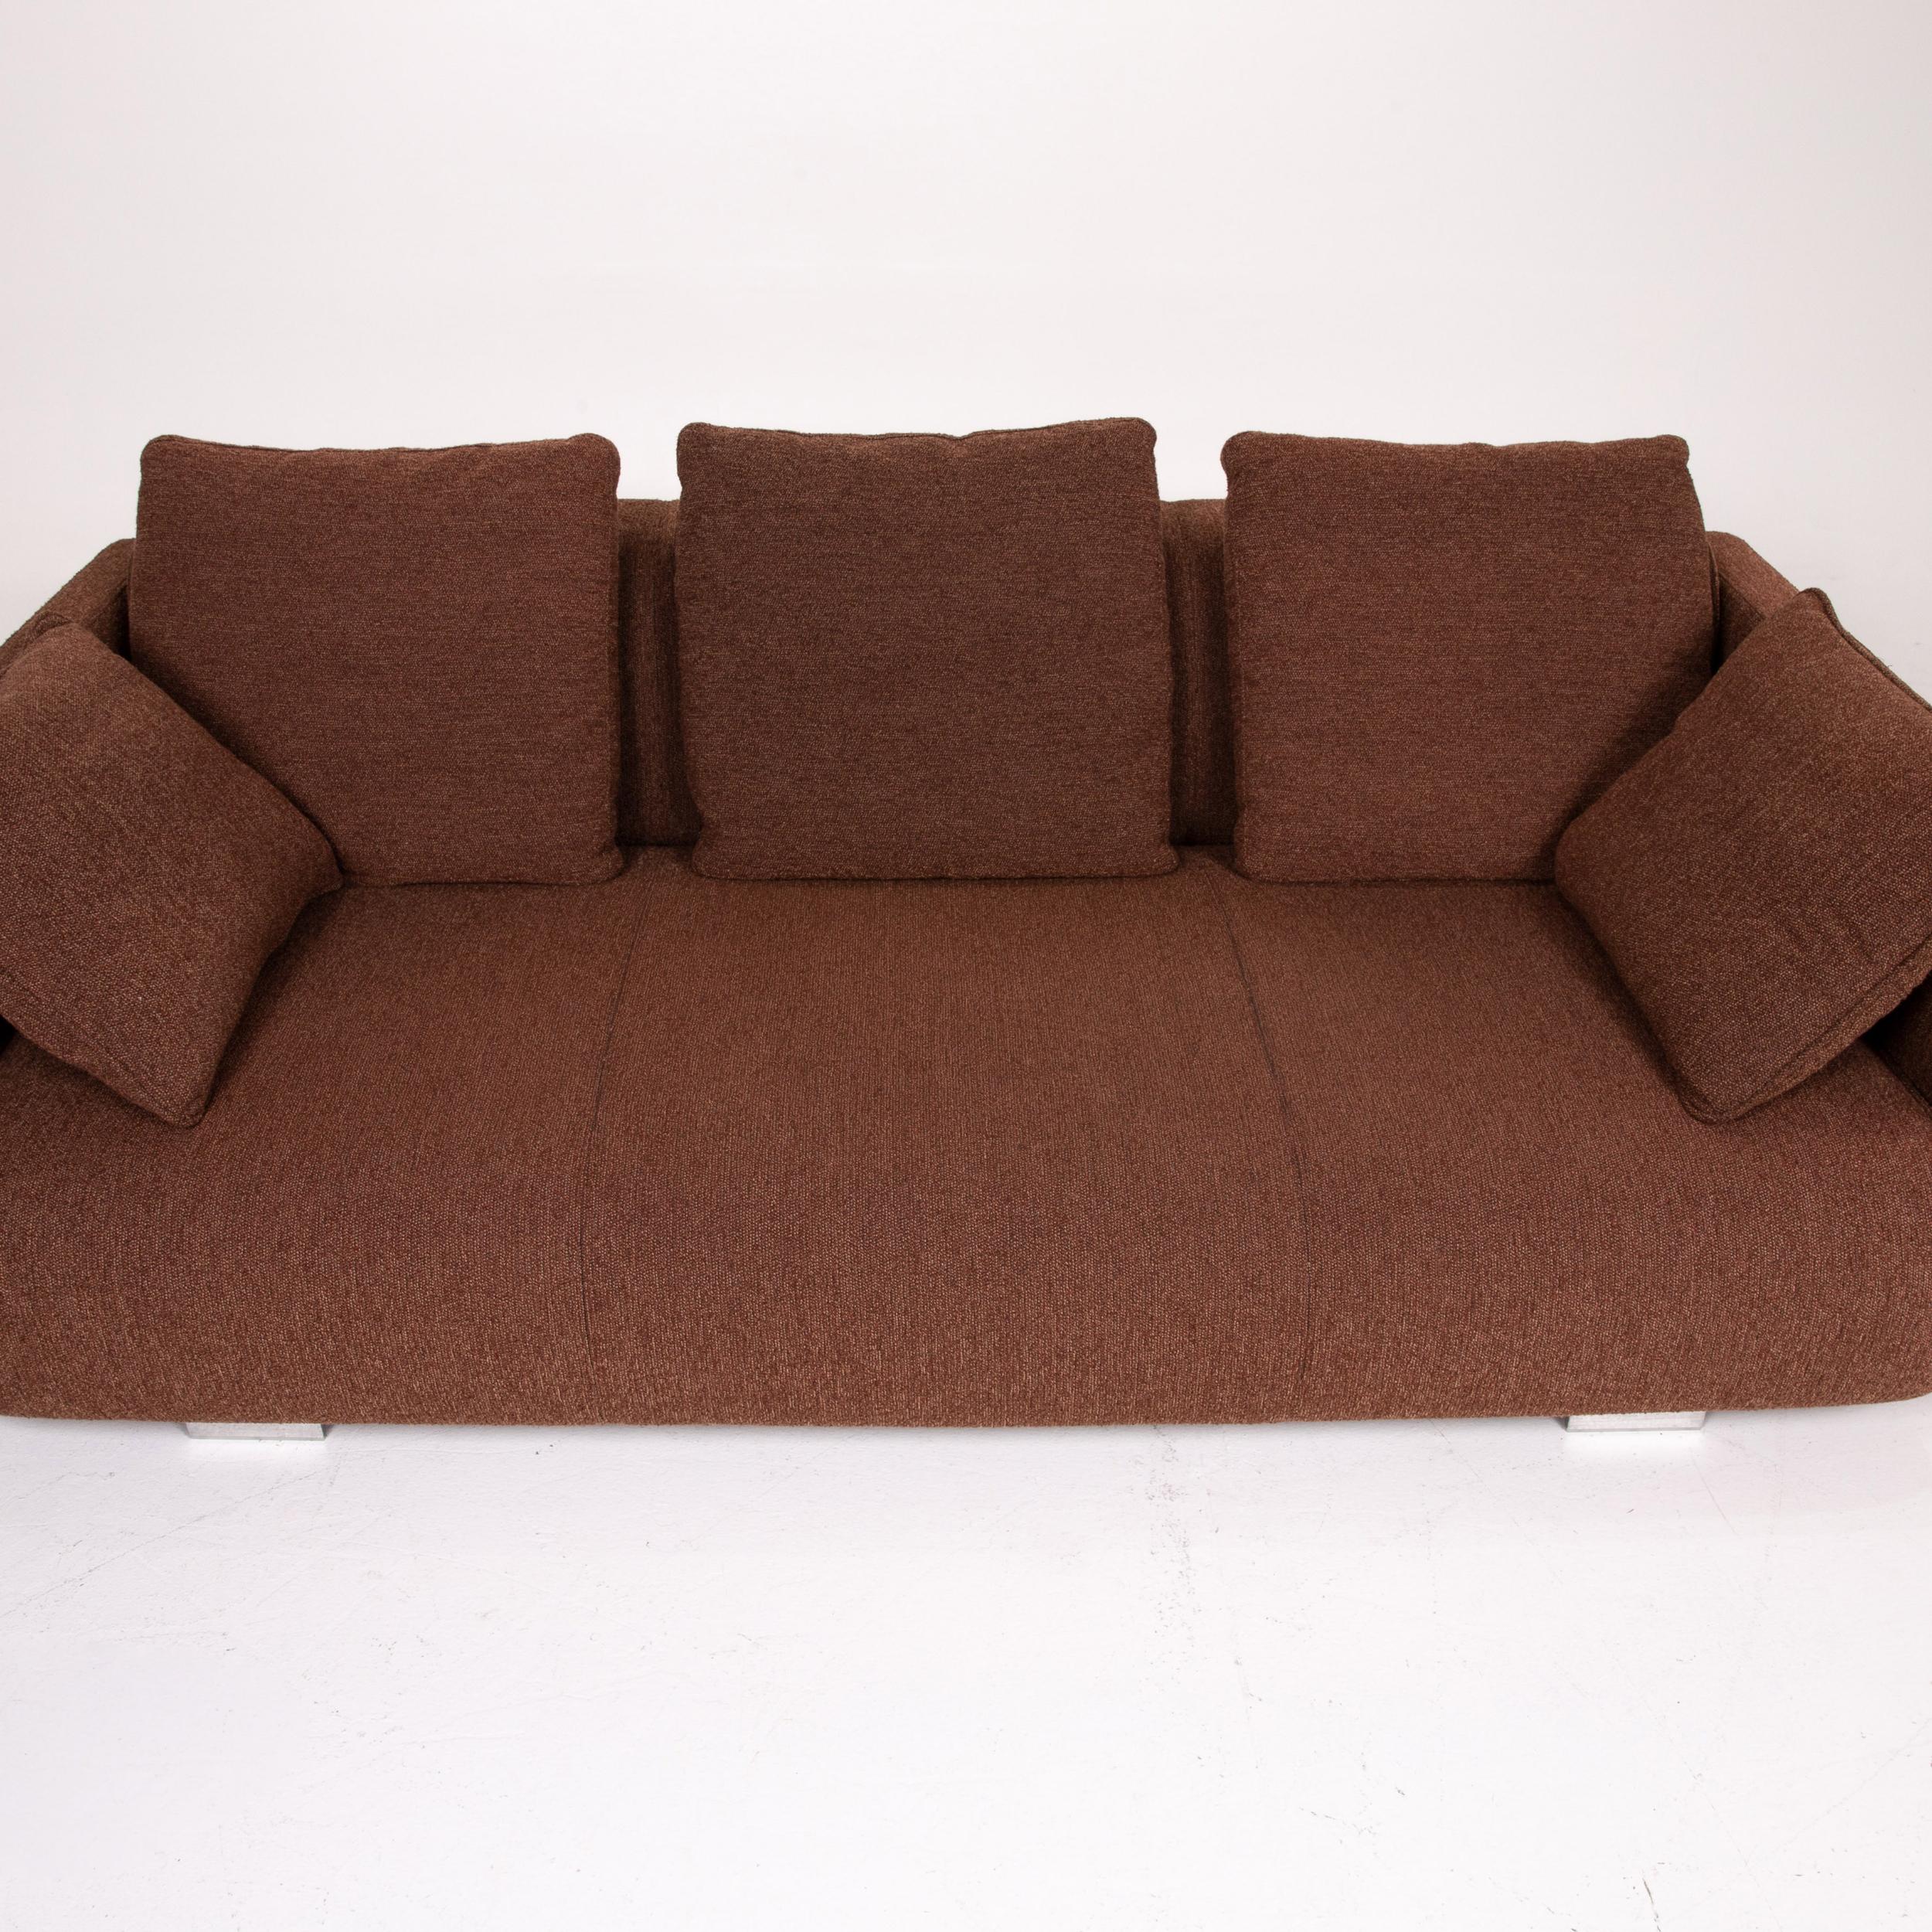 Contemporary Rolf Benz 6300 Fabric Sofa Brown Three-Seat Couch For Sale